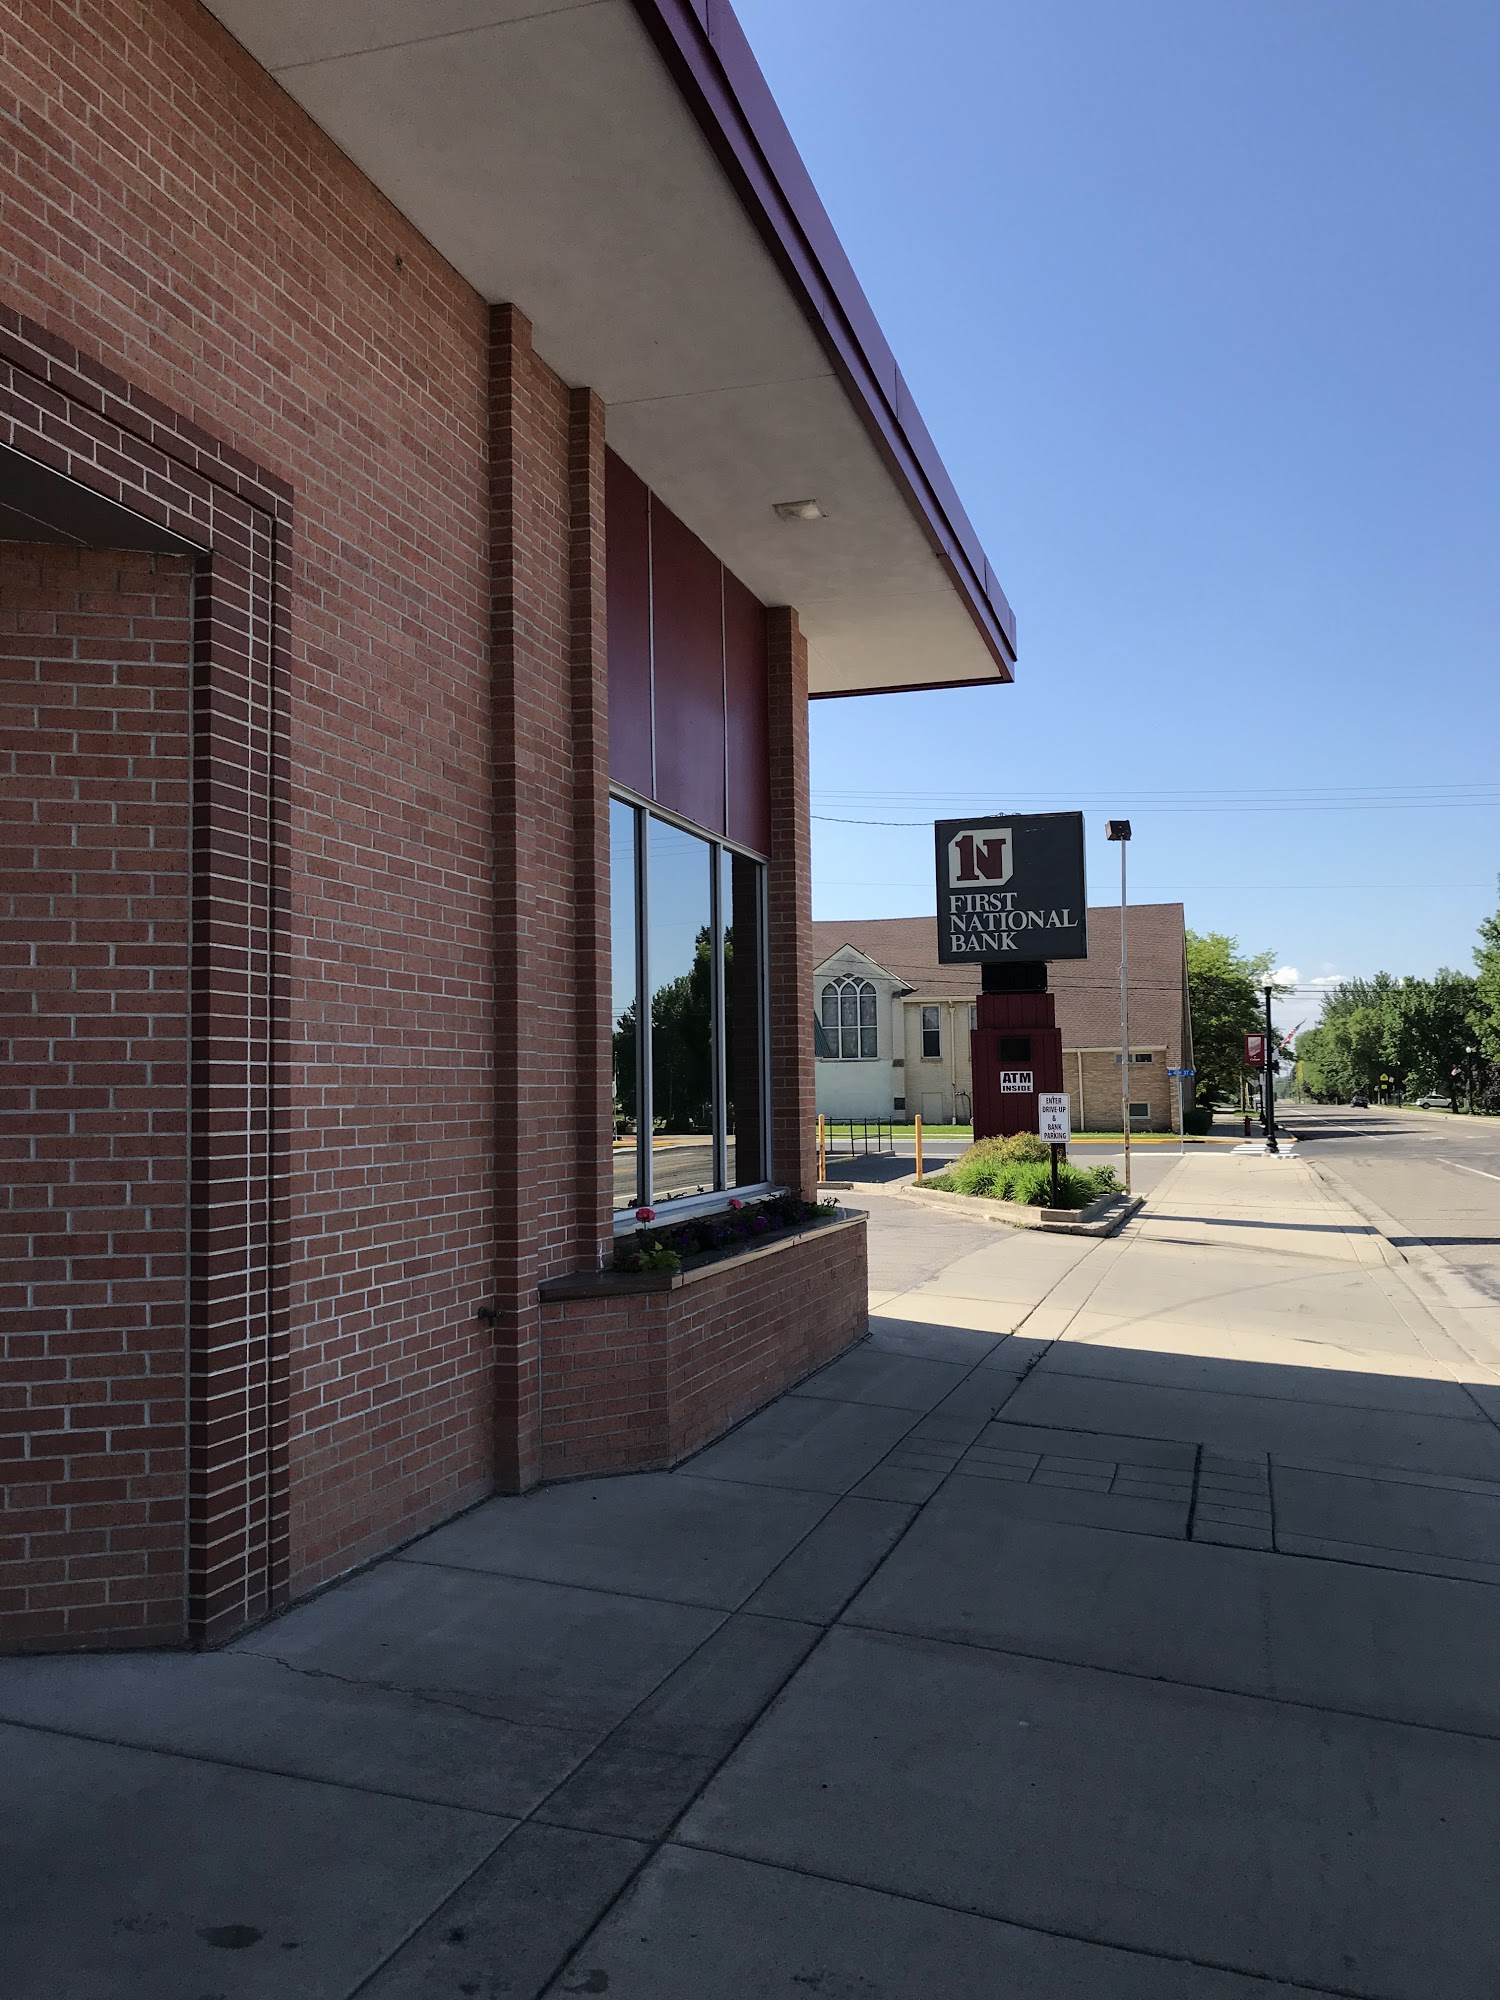 First National Bank of Cokato